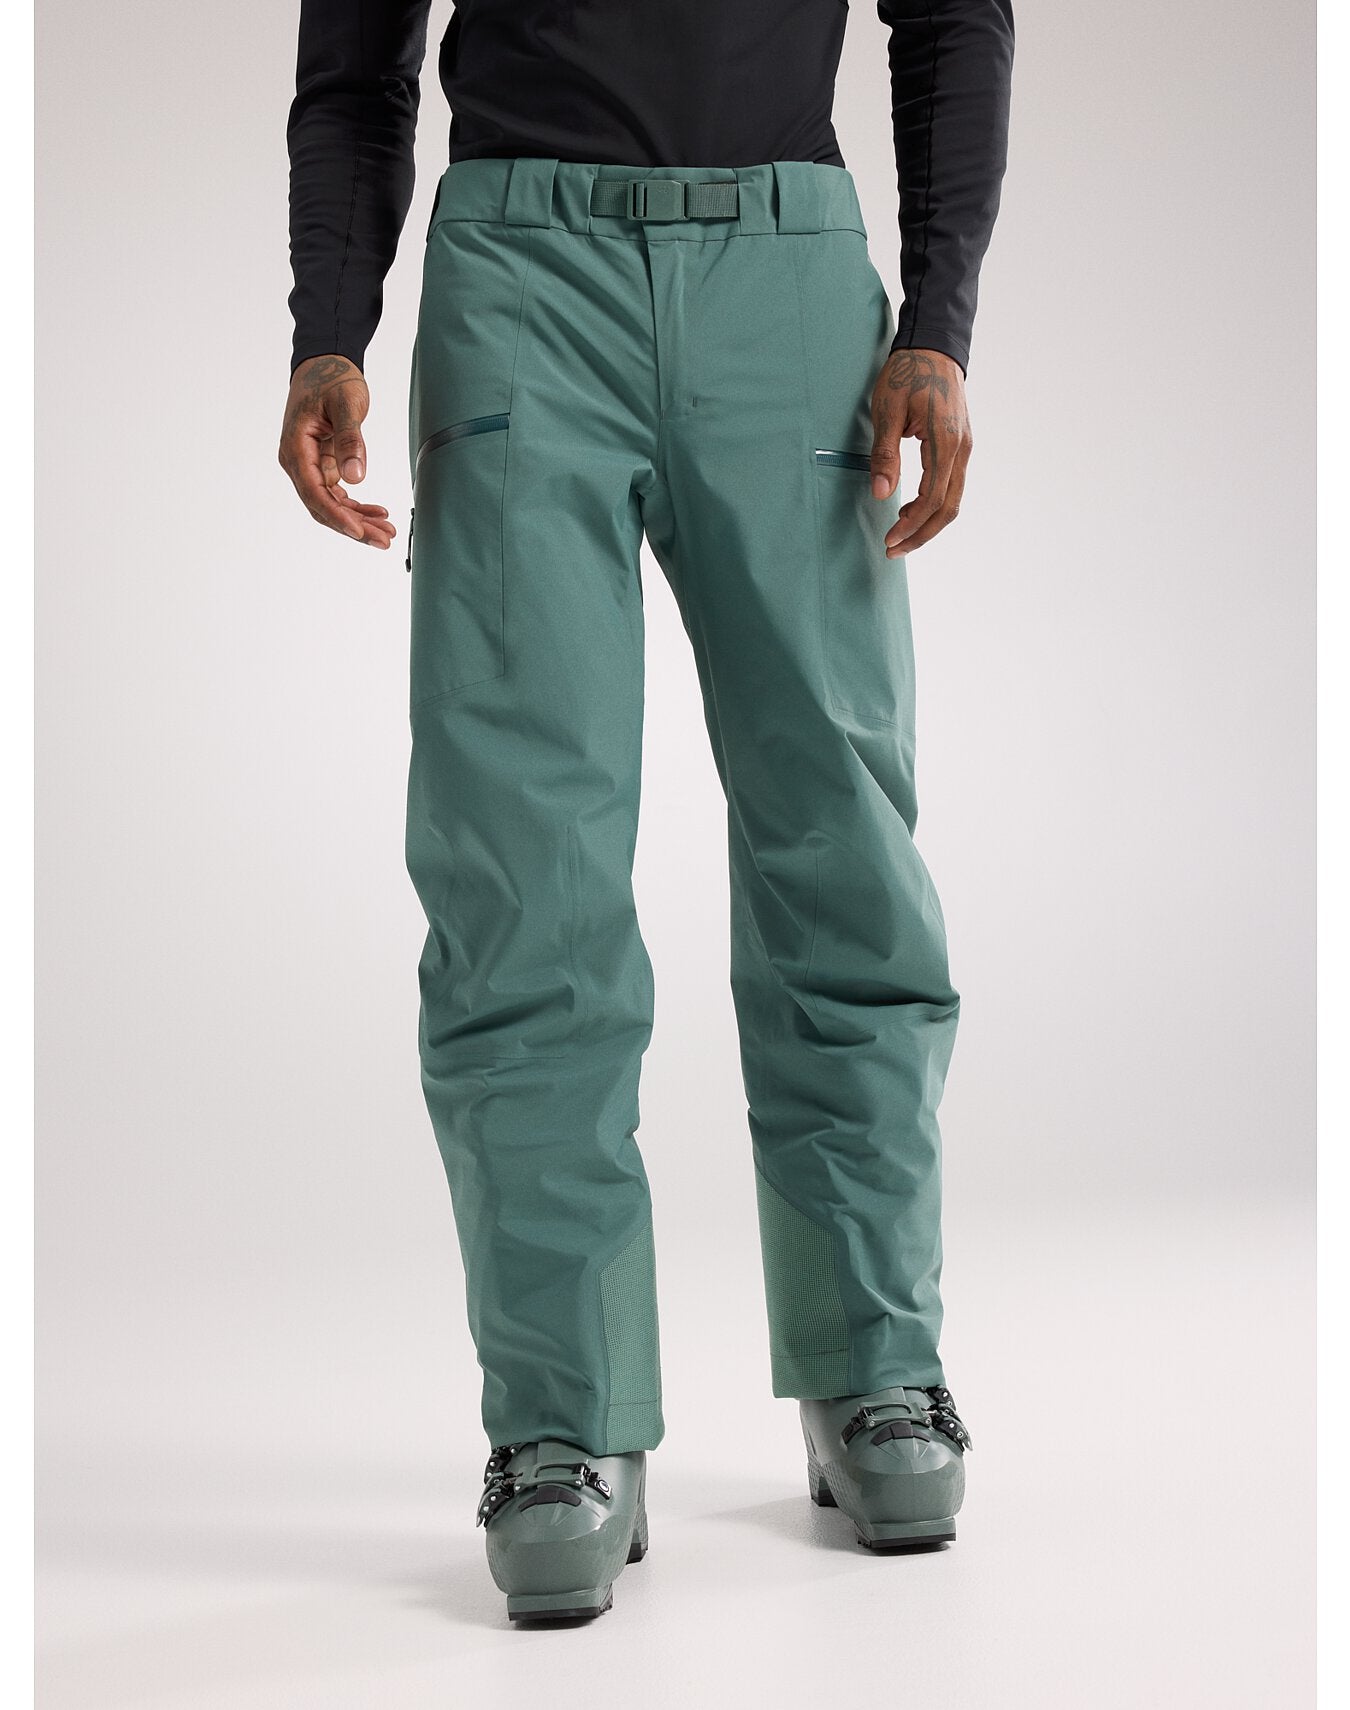 F23-X000007145-Sabre-Insulated-Pant-Boxcar-Front-View_bab388b5-e944-4a99-9bbb-69f04eef55df.jpg